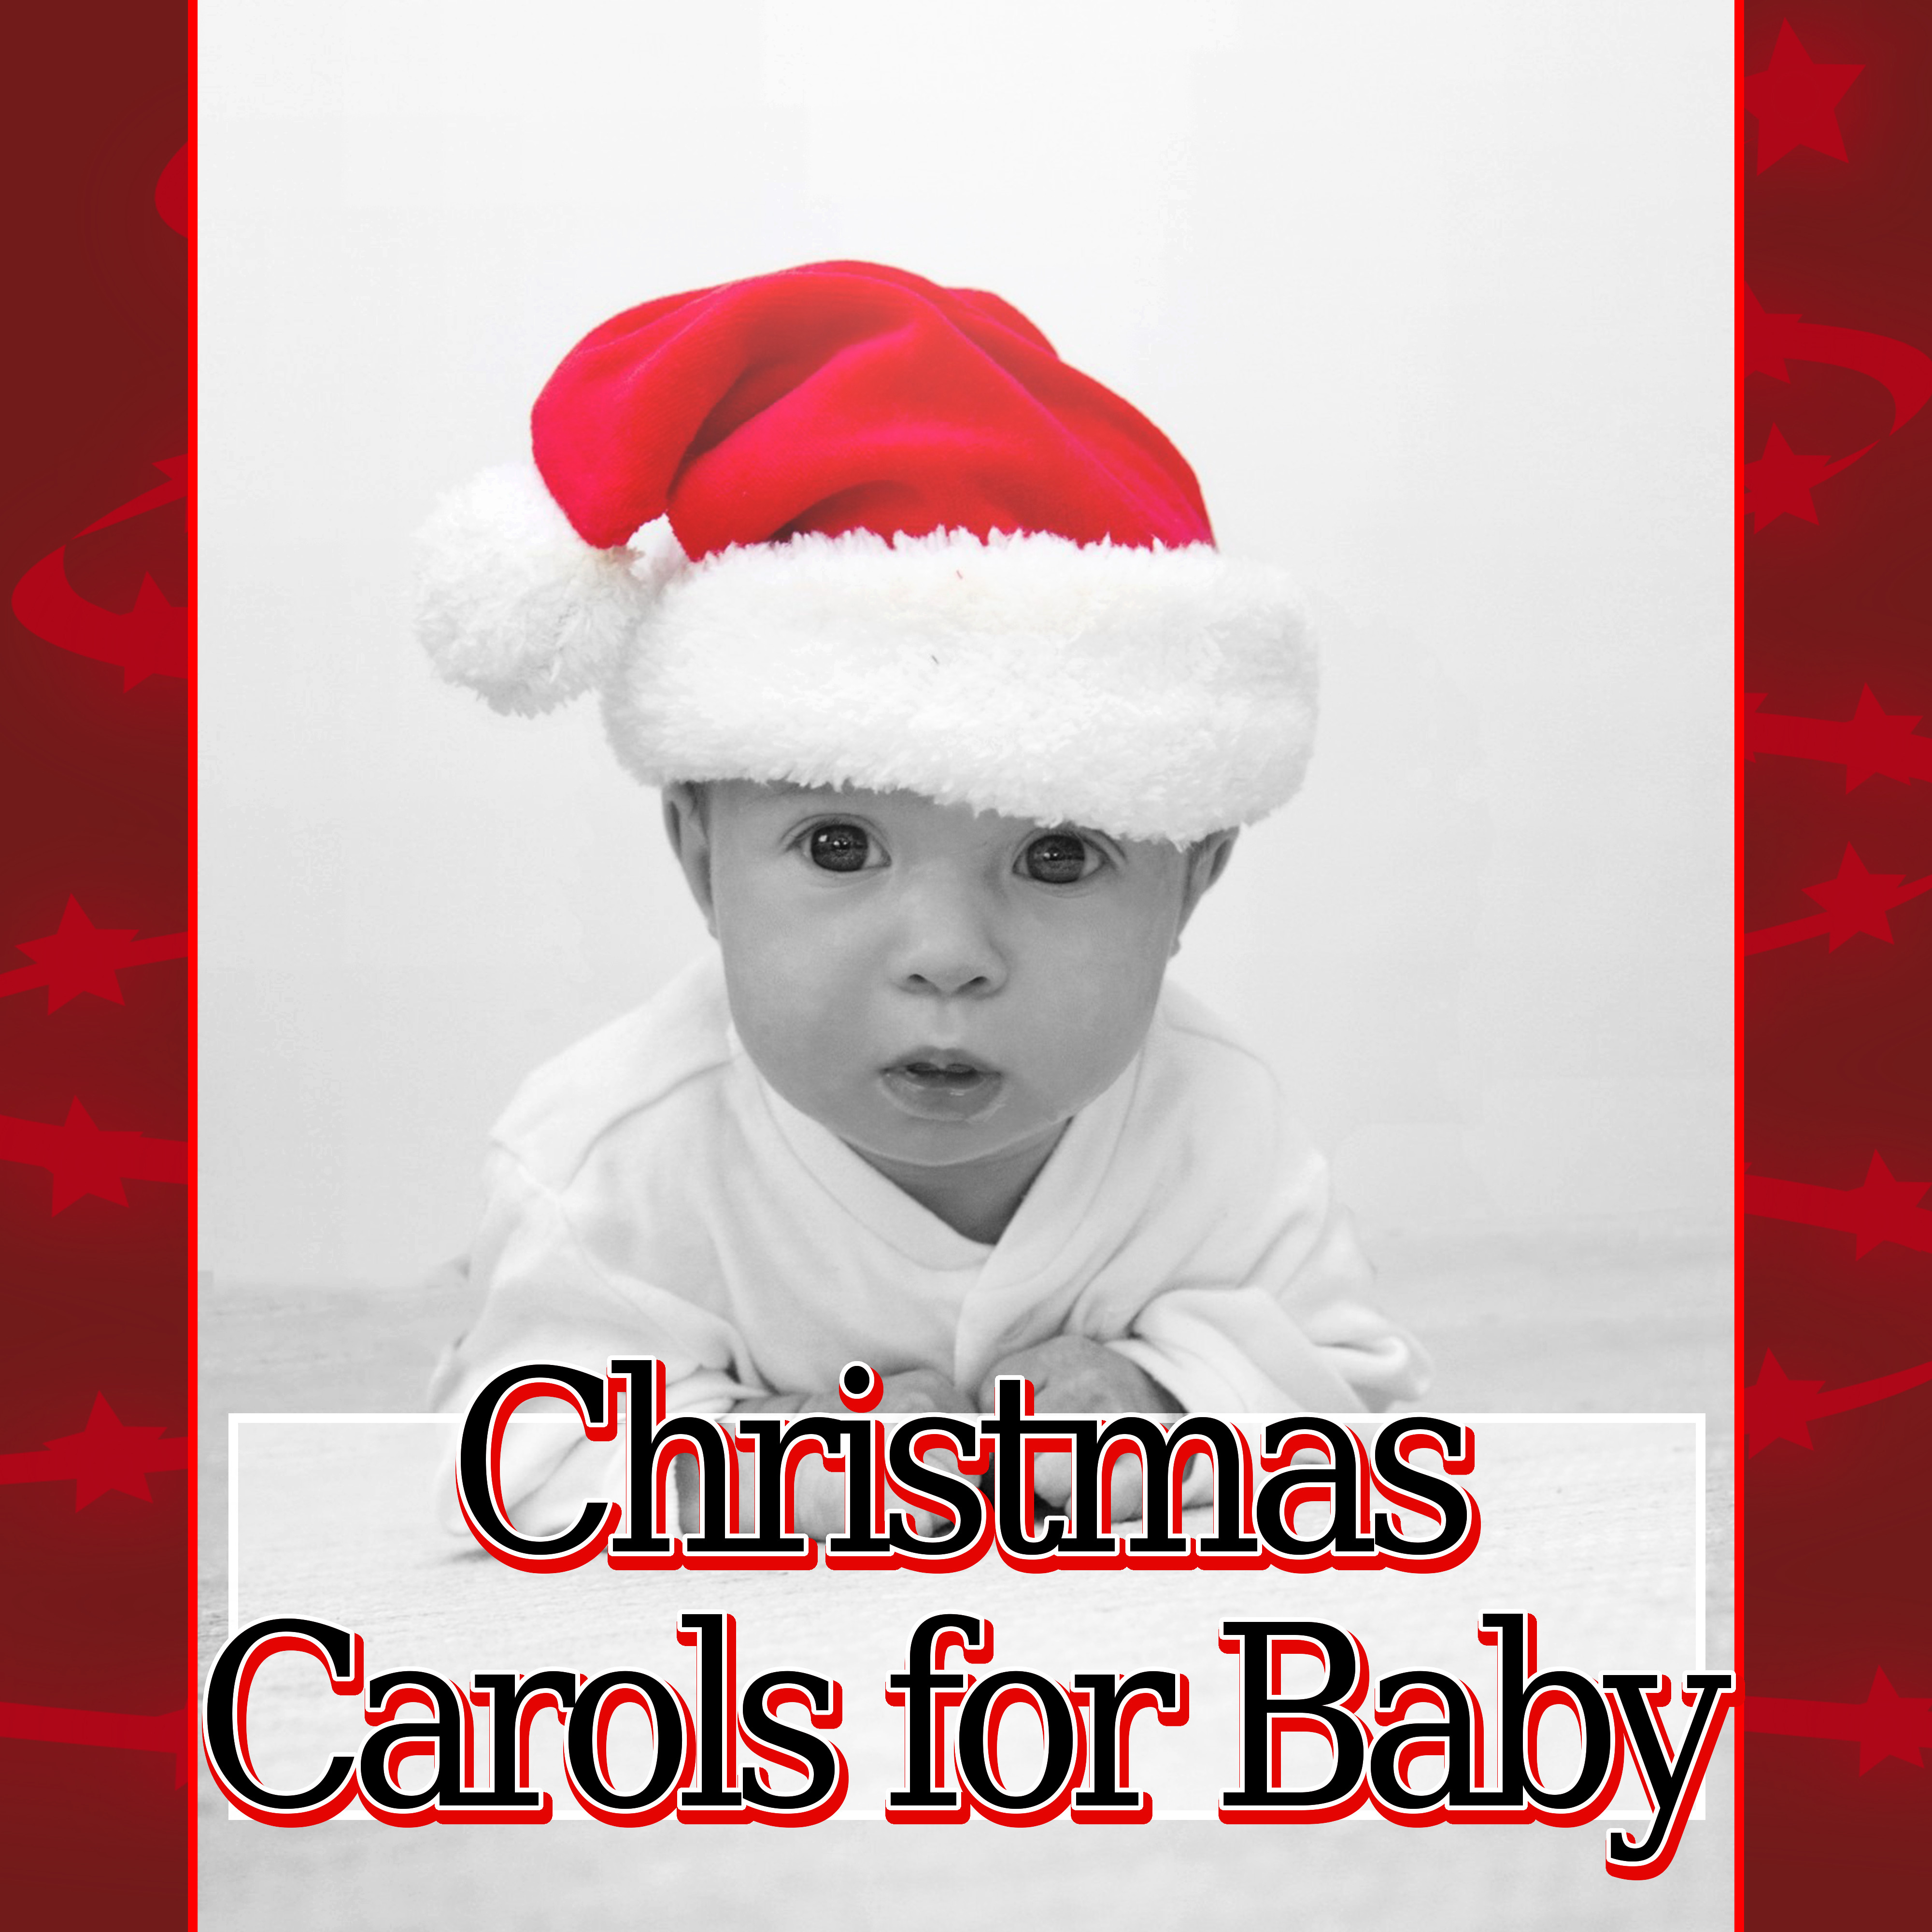 Christmas Carols for Baby - Traditional Christmas Songs & Soothing Nature Sounds, Songs for Baby Sleep during Christmas Time, Calm Night